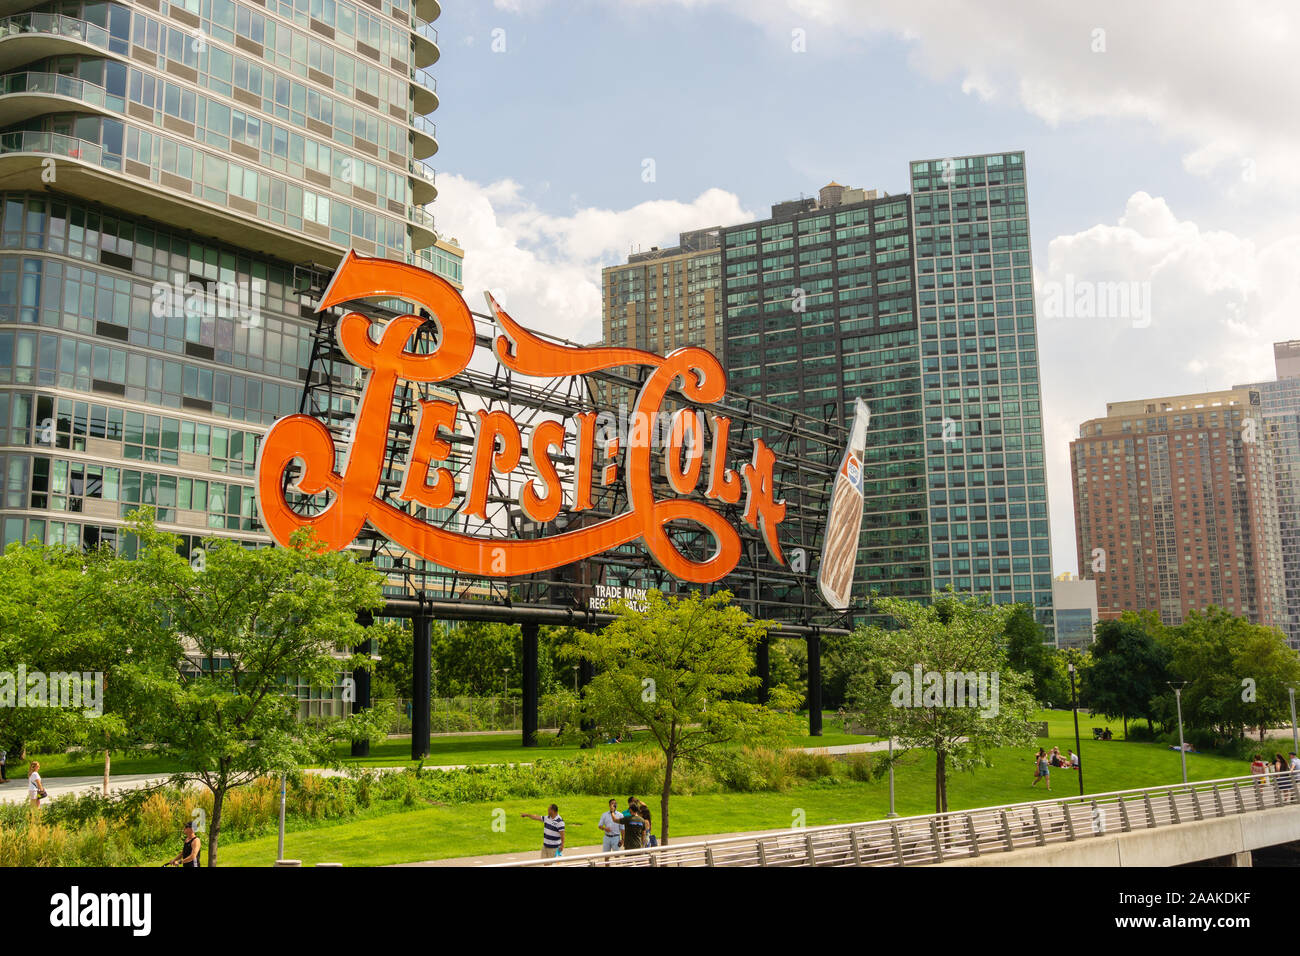 New York, USA - August 20, 2018: Long Island City waterfront with landmark Pepsi Cola sign located at Gantry Plaza State Park in Queens Stock Photo